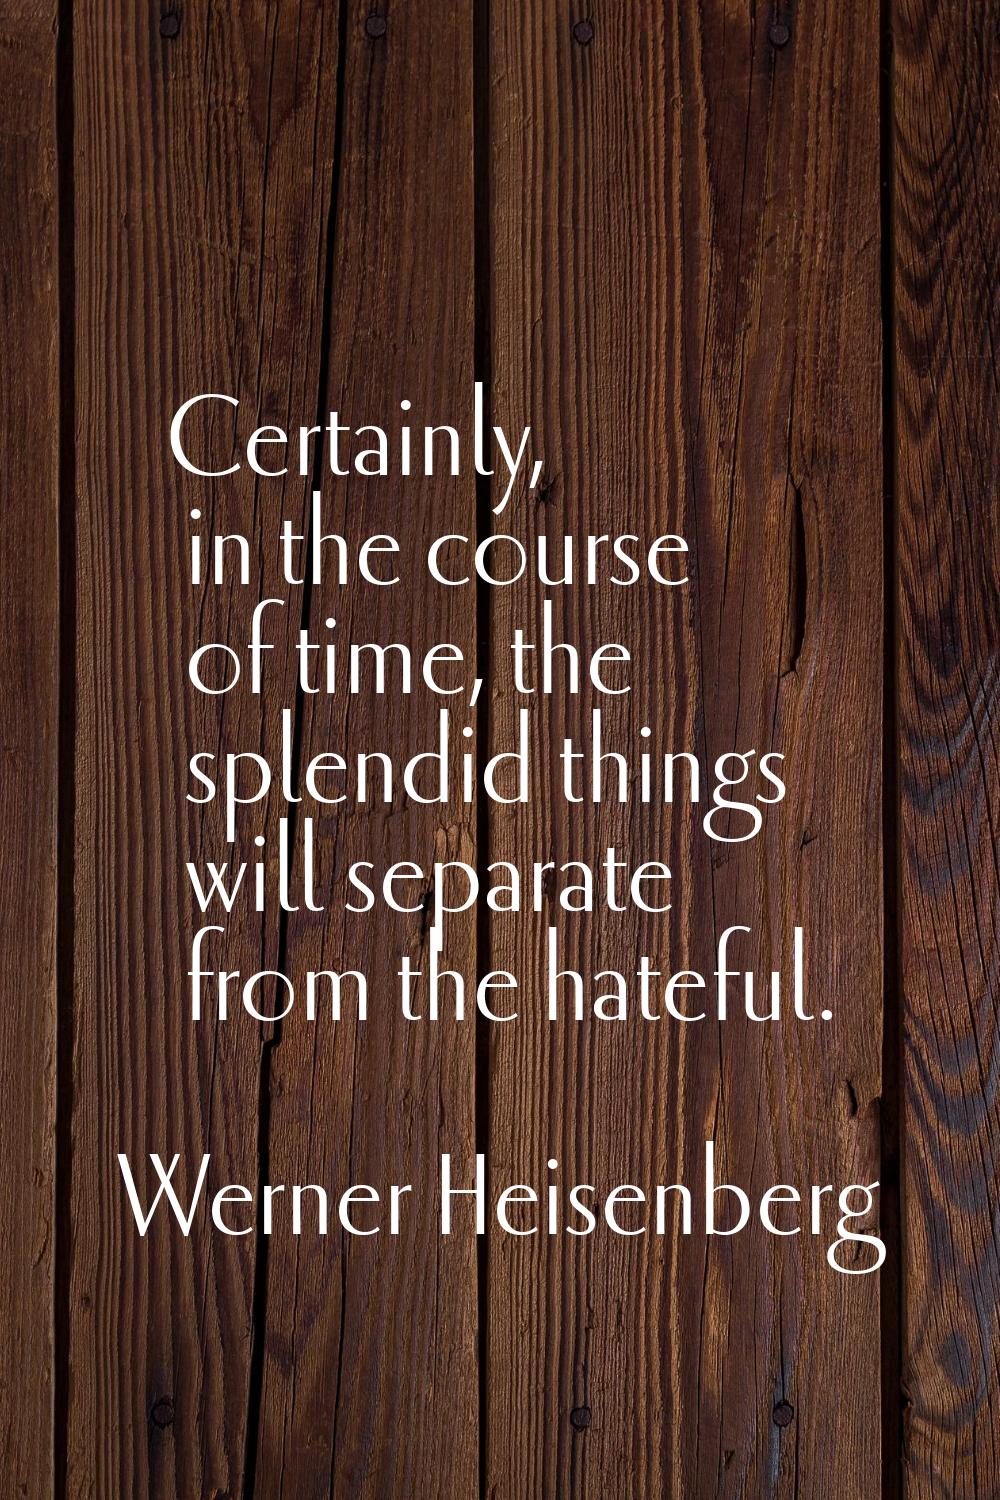 Certainly, in the course of time, the splendid things will separate from the hateful.